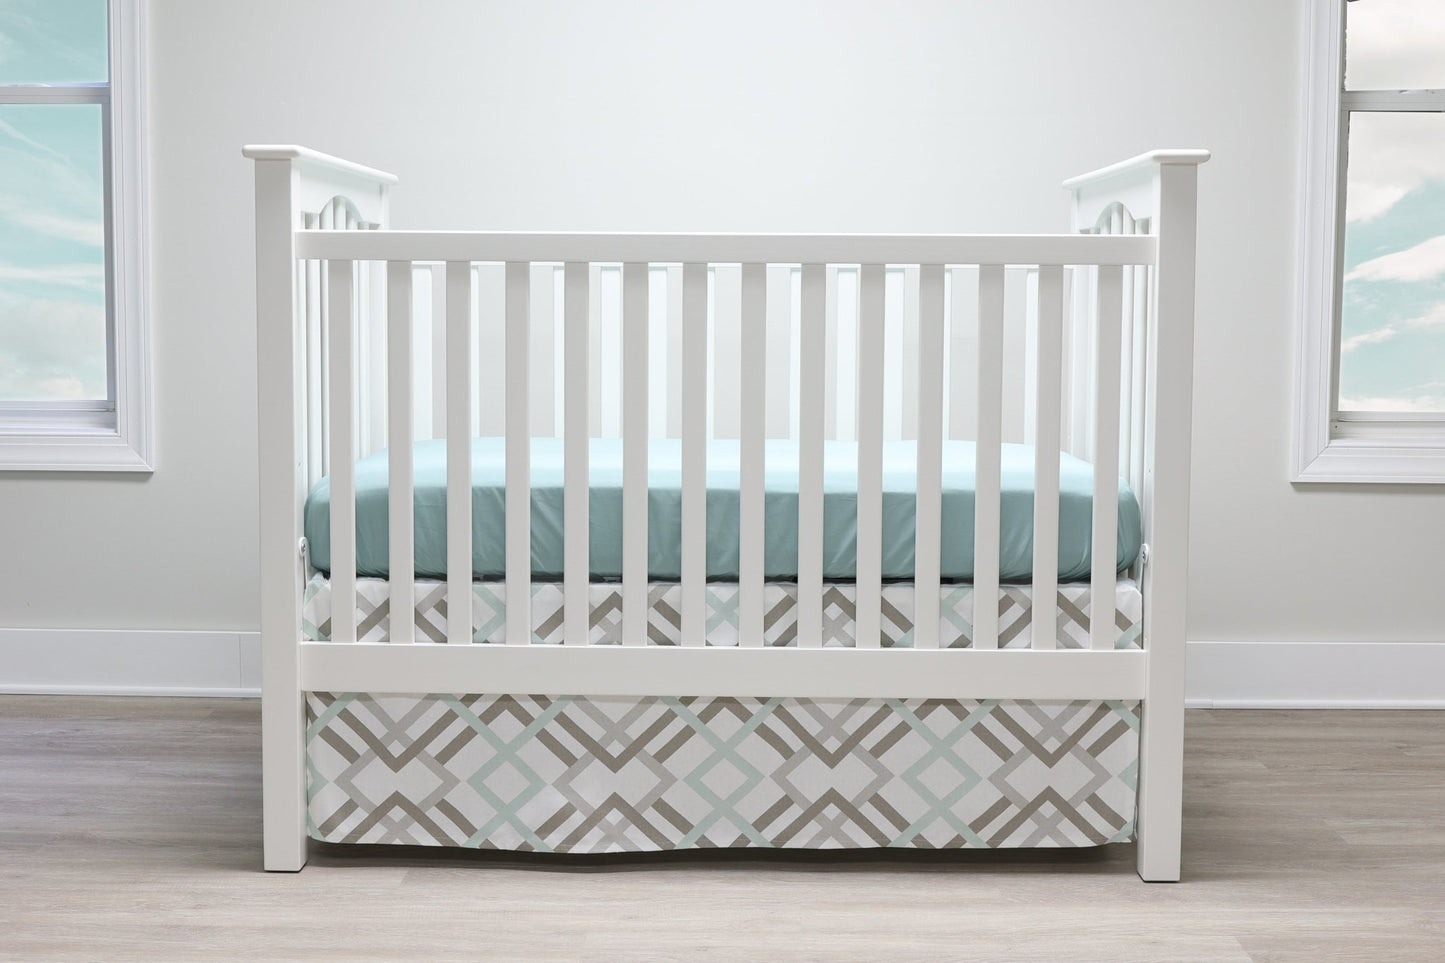 Robins Egg and Taupe Geometric Crib Bedding - 2 Piece Set - New Arrivals Inc